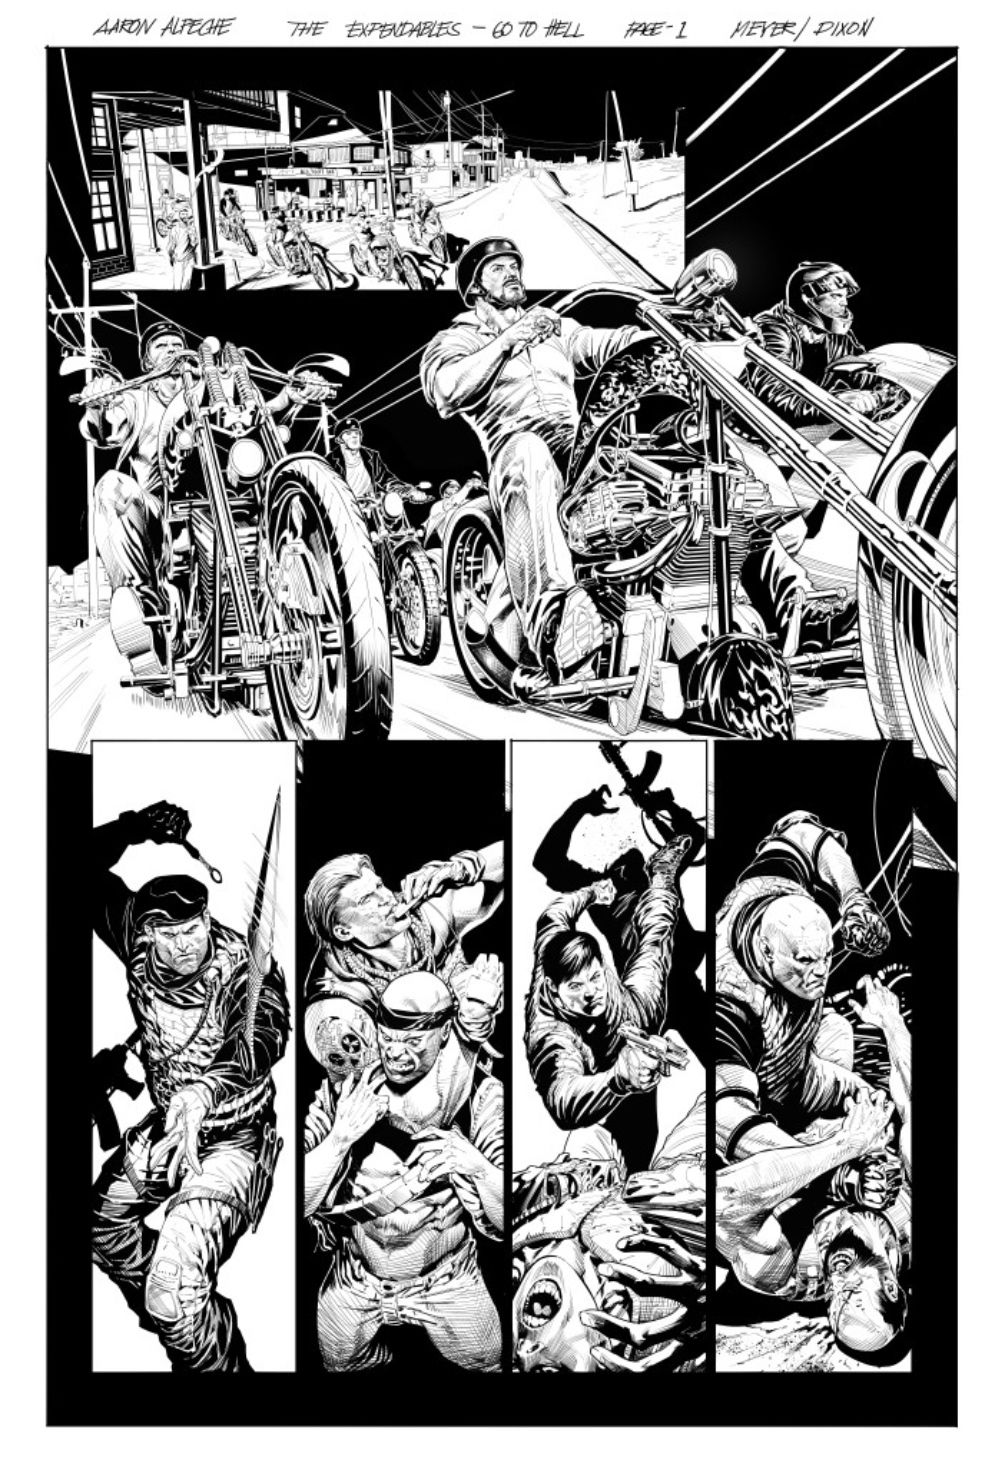 The Expendables Go To Hell Graphic Novel Page 1